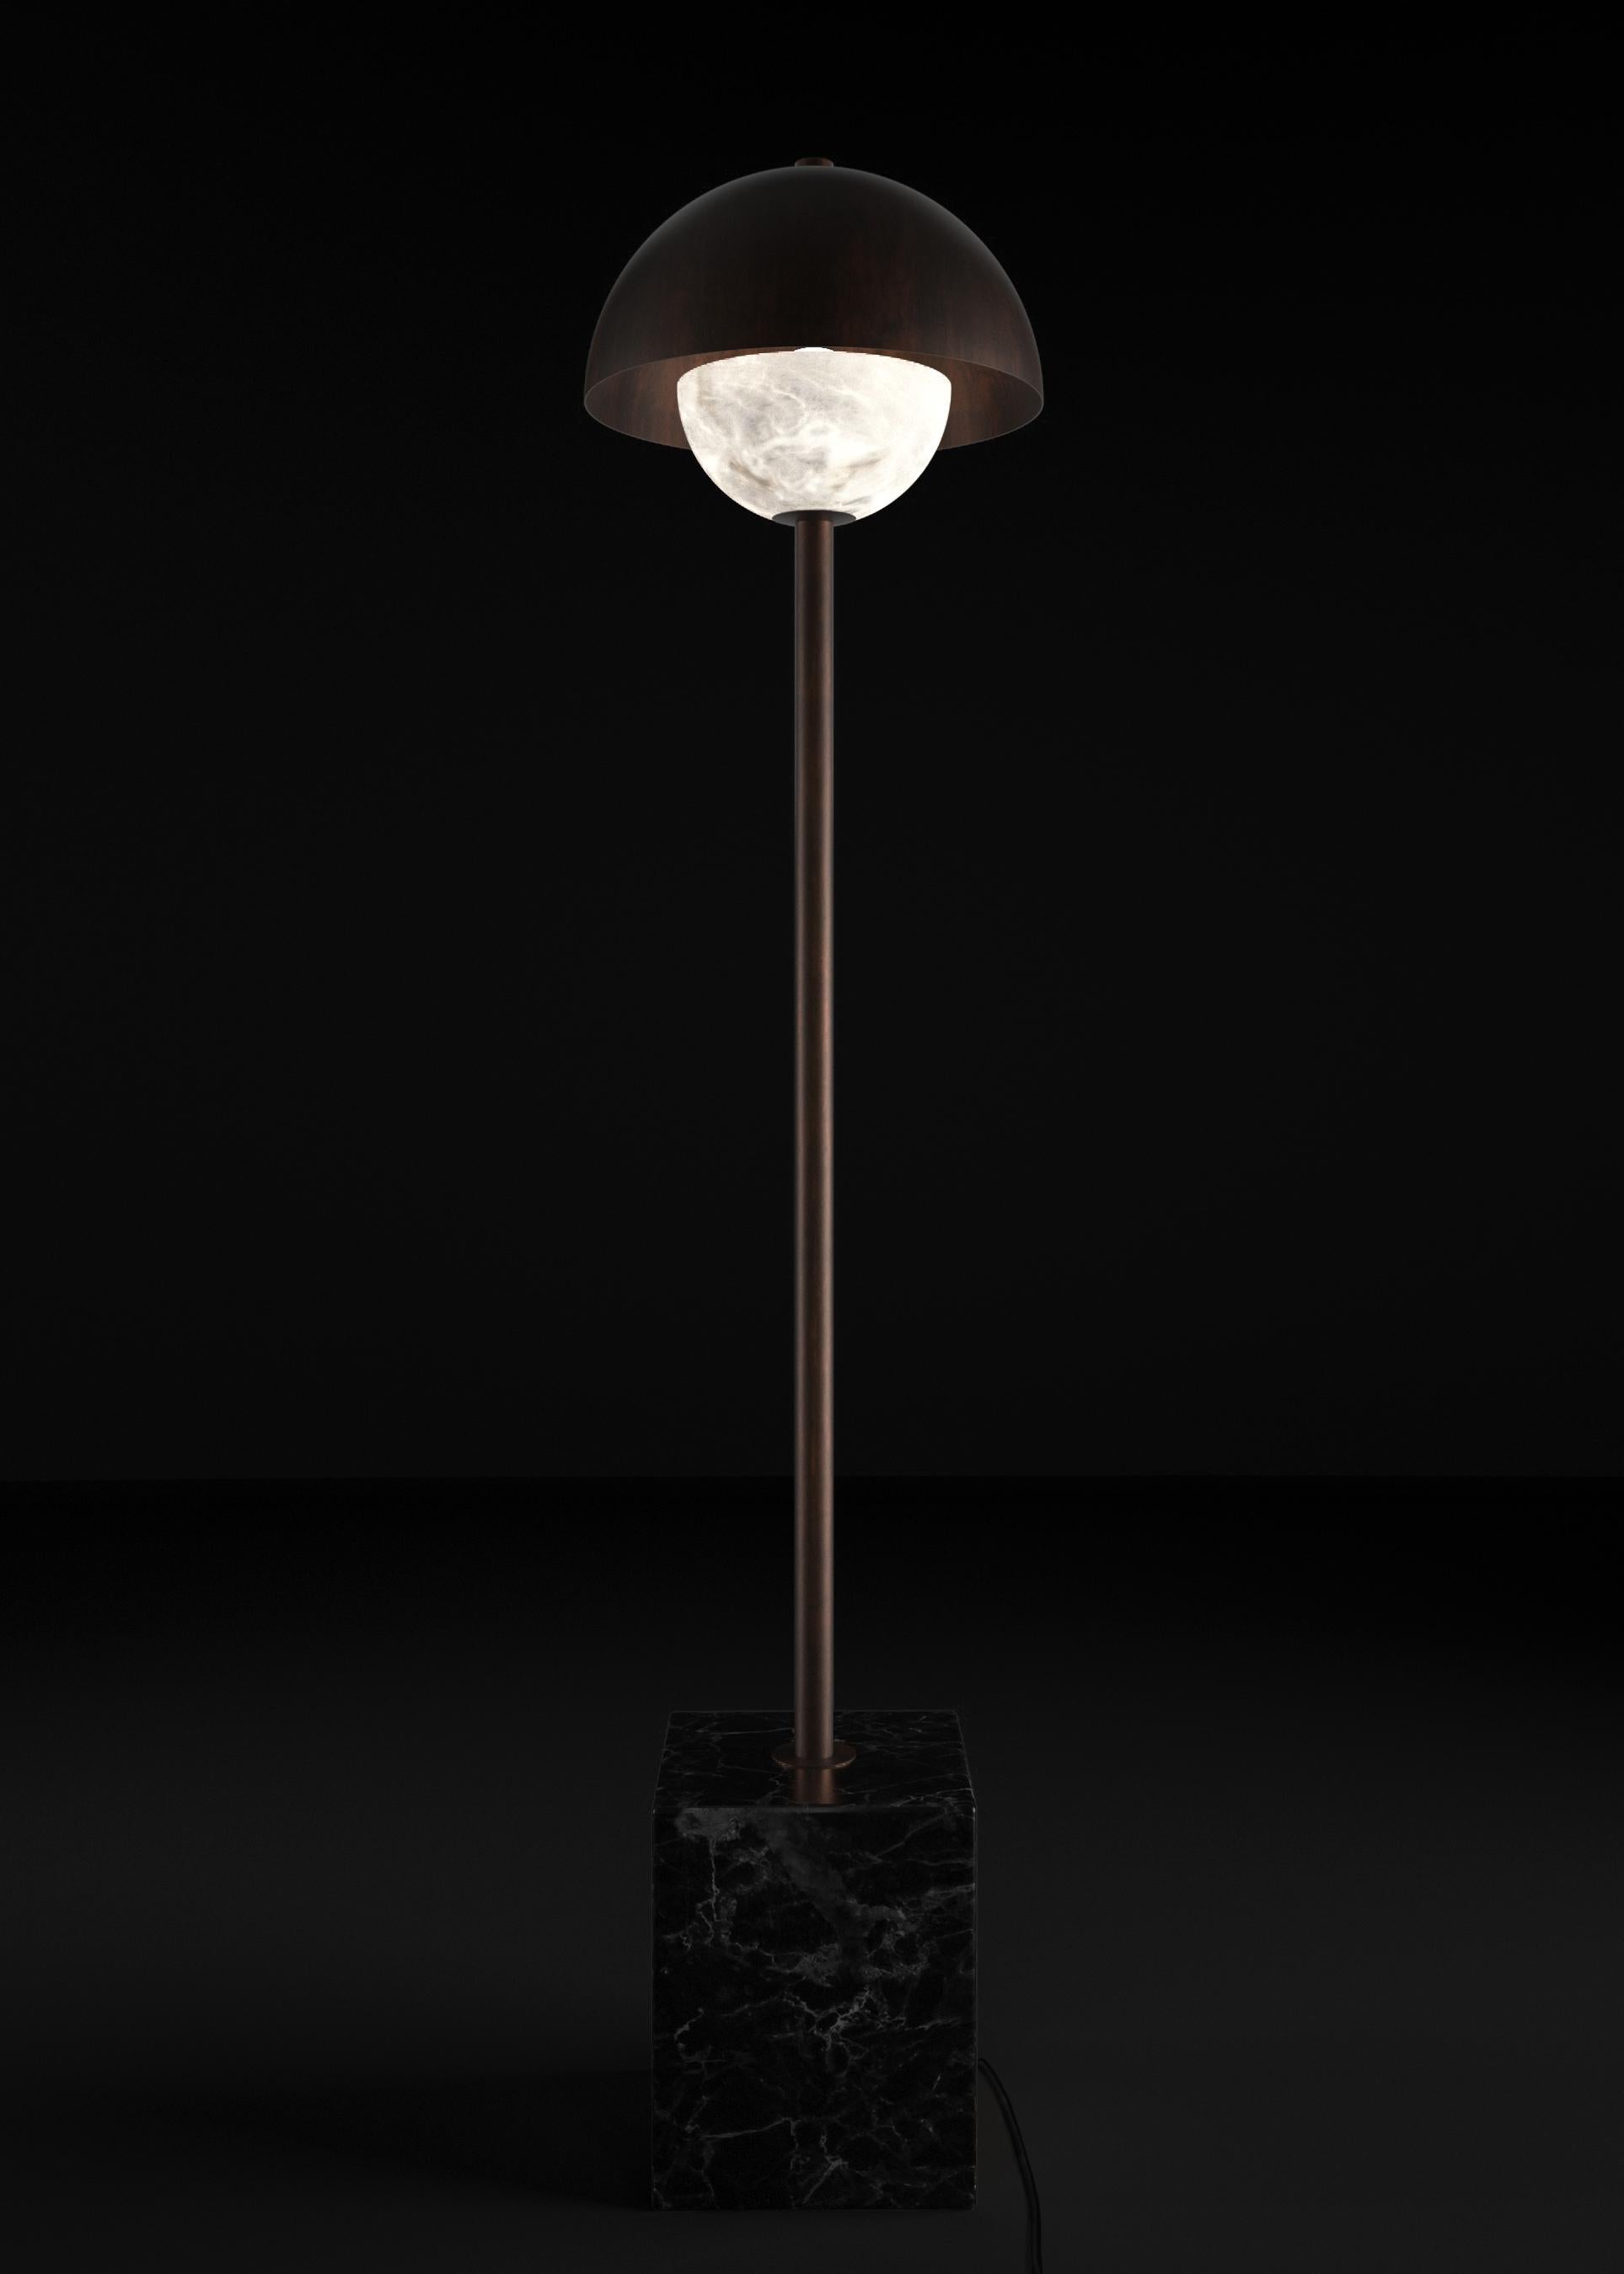 Apollo Ruggine Of Florence Metal Floor Lamp by Alabastro Italiano
Dimensions: D 30 x W 30 x H 130 cm.
Materials: White alabaster, Nero Marquinia marble, black silk cables and metal.

Available in different finishes: Shiny Silver, Bronze, Brushed